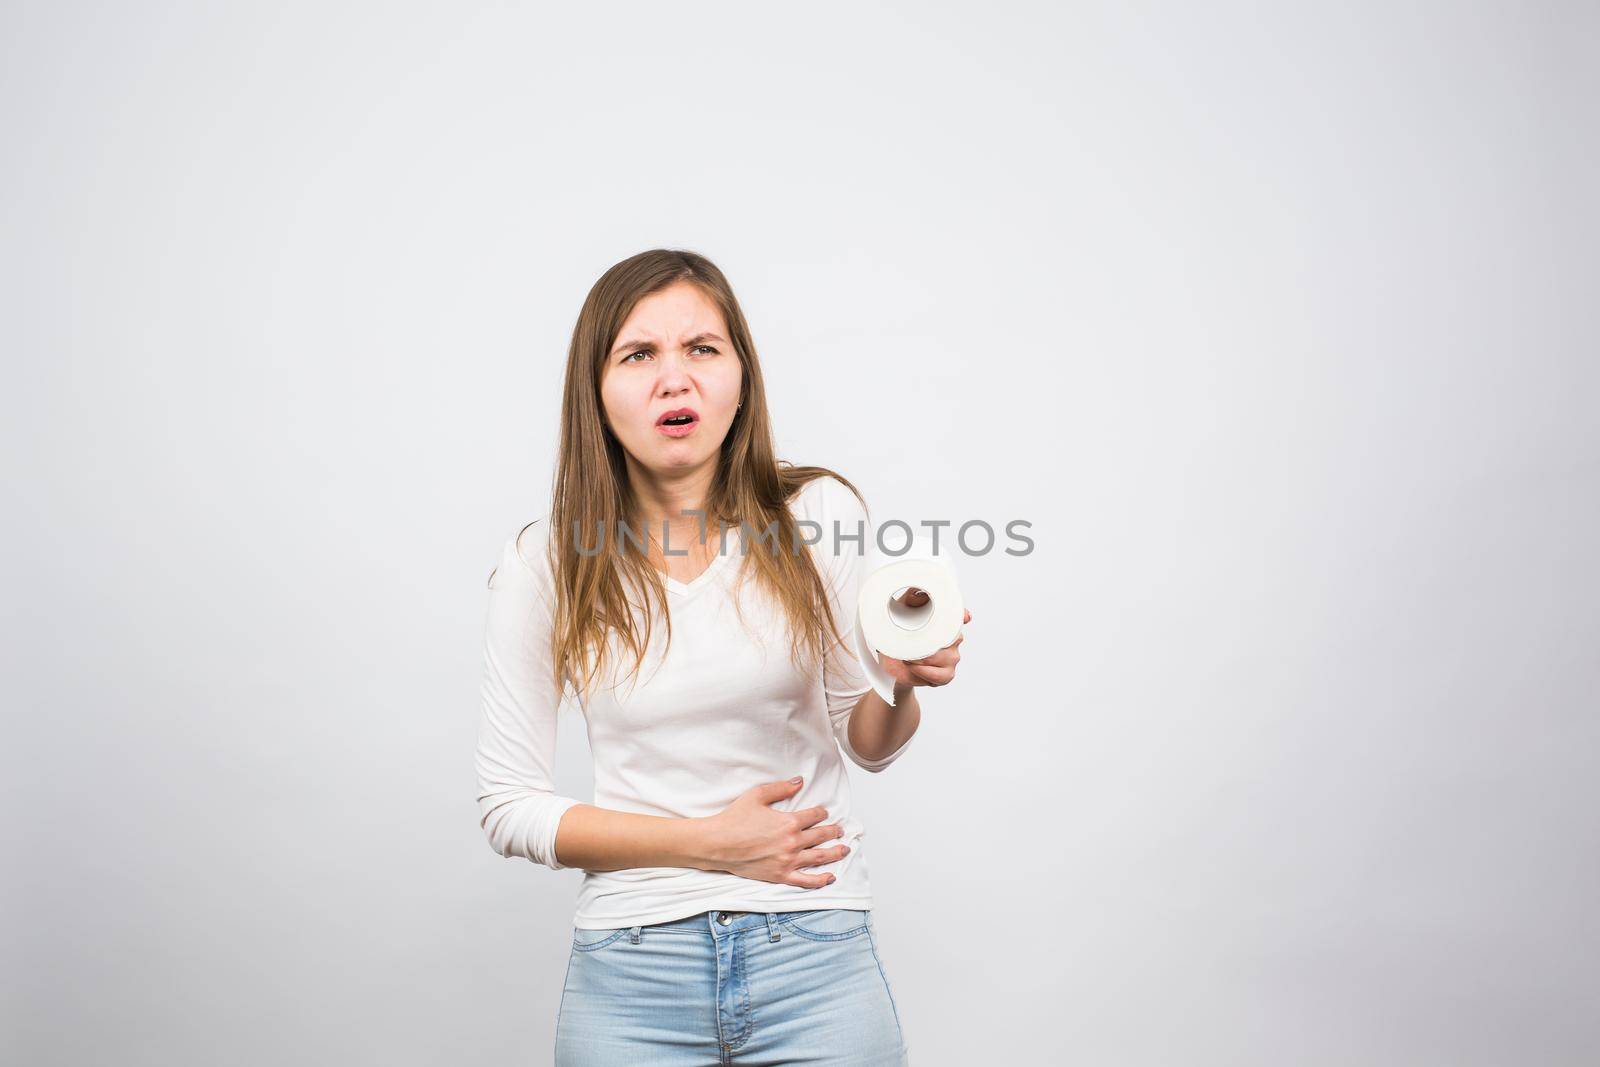 Sick woman with hands pressing her crotch lower abdomen, holding paper roll. Medical problems, incontinence, health care concept.